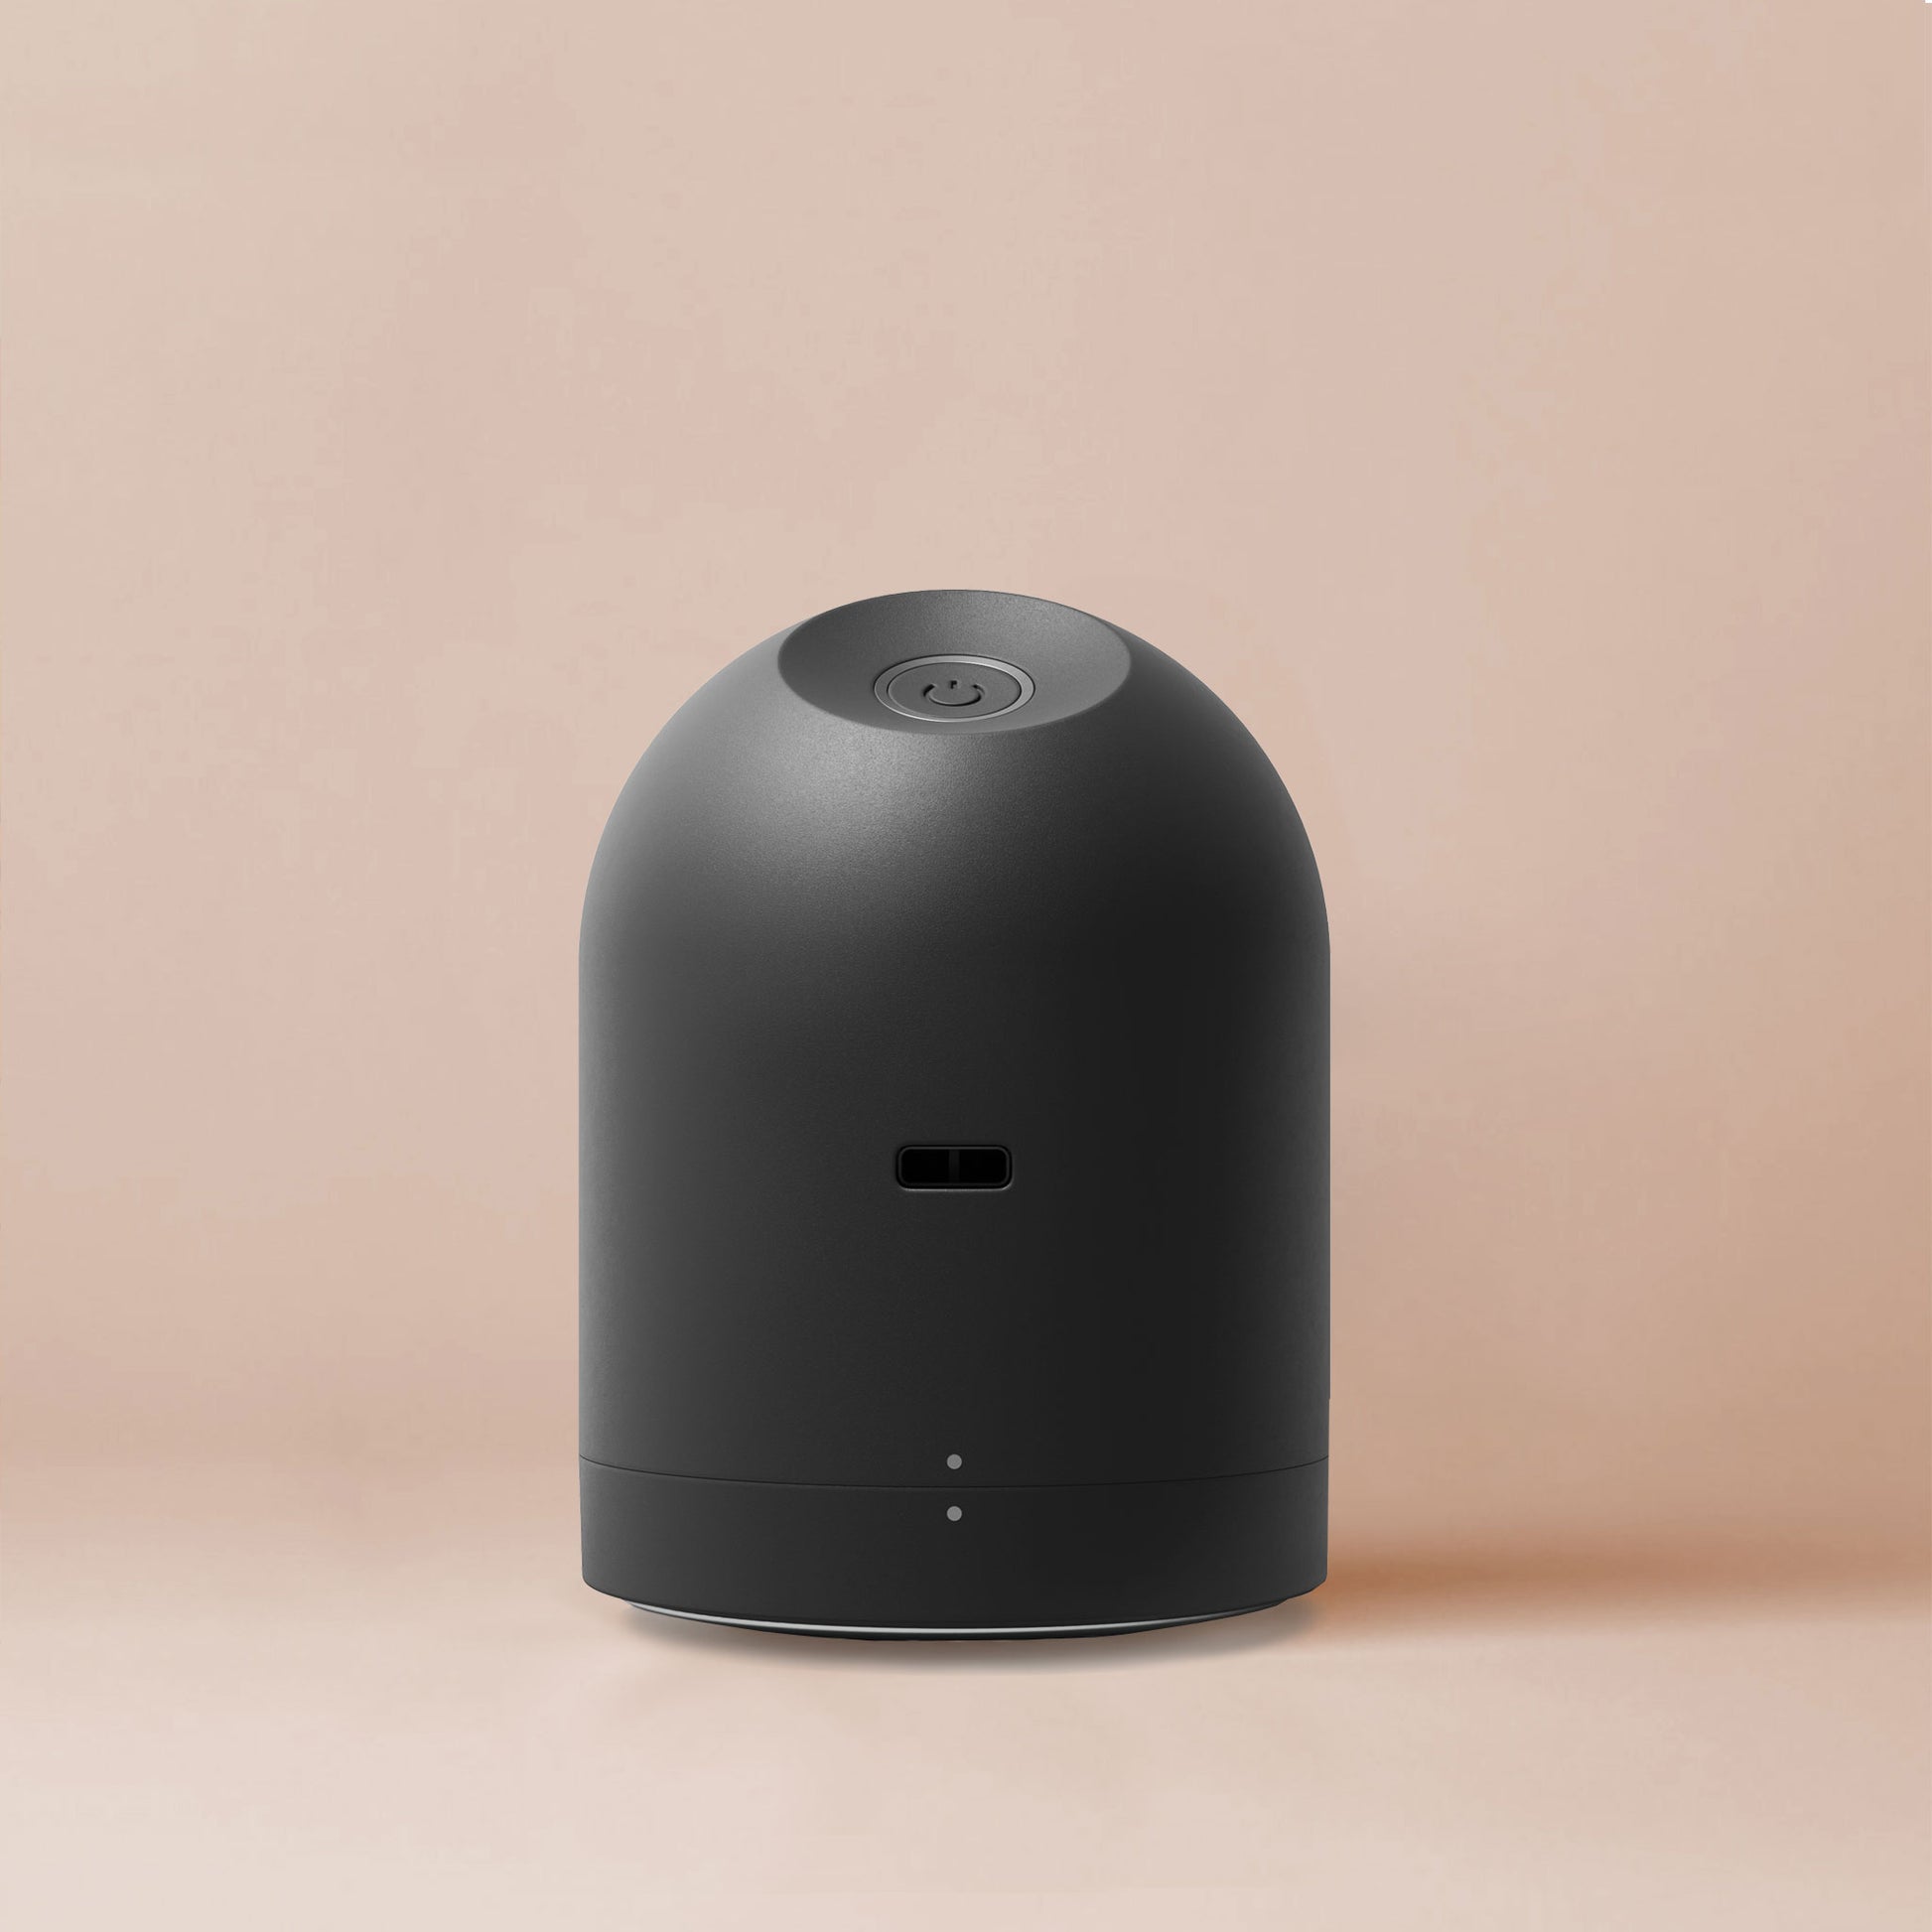 A sleek dome shaped charcoal fabric shaver is displayed on a beige background; a power button and a hole for the USB charger can be seen on the device from this angle